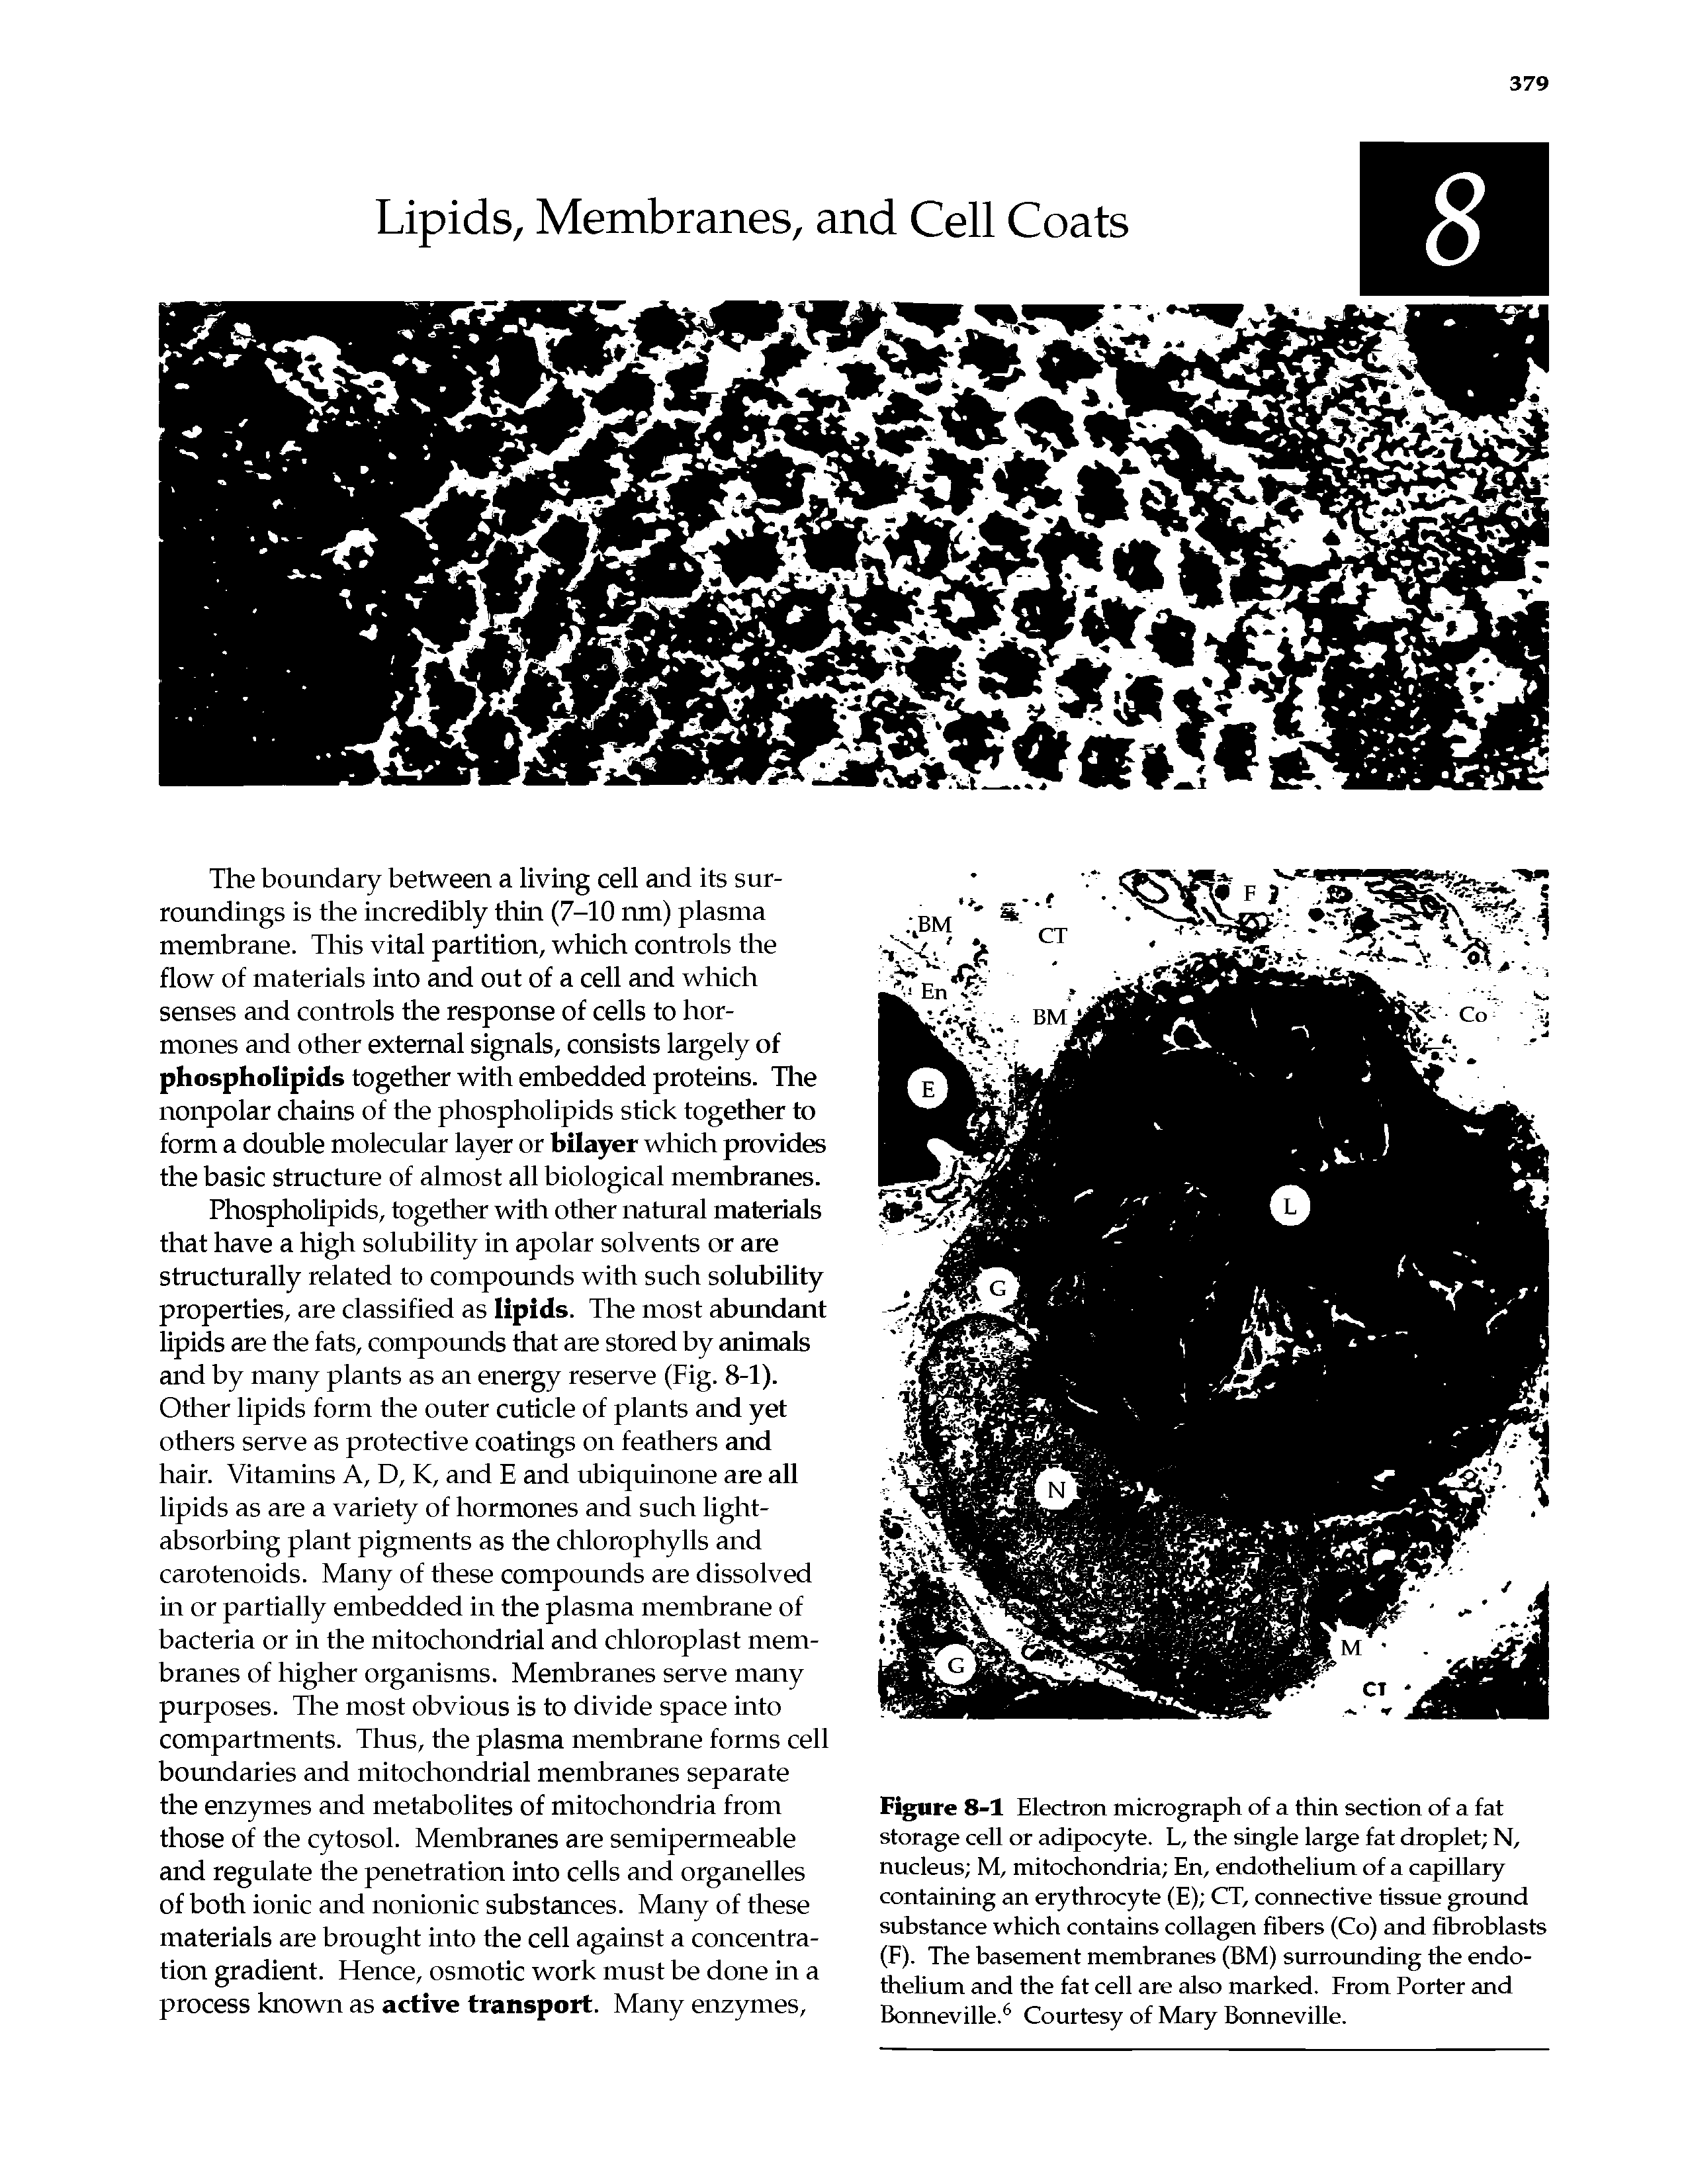 Figure 8-1 Electron micrograph of a thin section of a fat storage cell or adipocyte. L, the single large fat droplet N, nucleus M, mitochondria En, endothelium of a capillary containing an erythrocyte (E) CT, connective tissue ground substance which contains collagen fibers (Co) and fibroblasts (F). The basement membranes (BM) surrounding the endothelium and the fat cell are also marked. From Porter and Bonneville.6 Courtesy of Mary Bonneville.